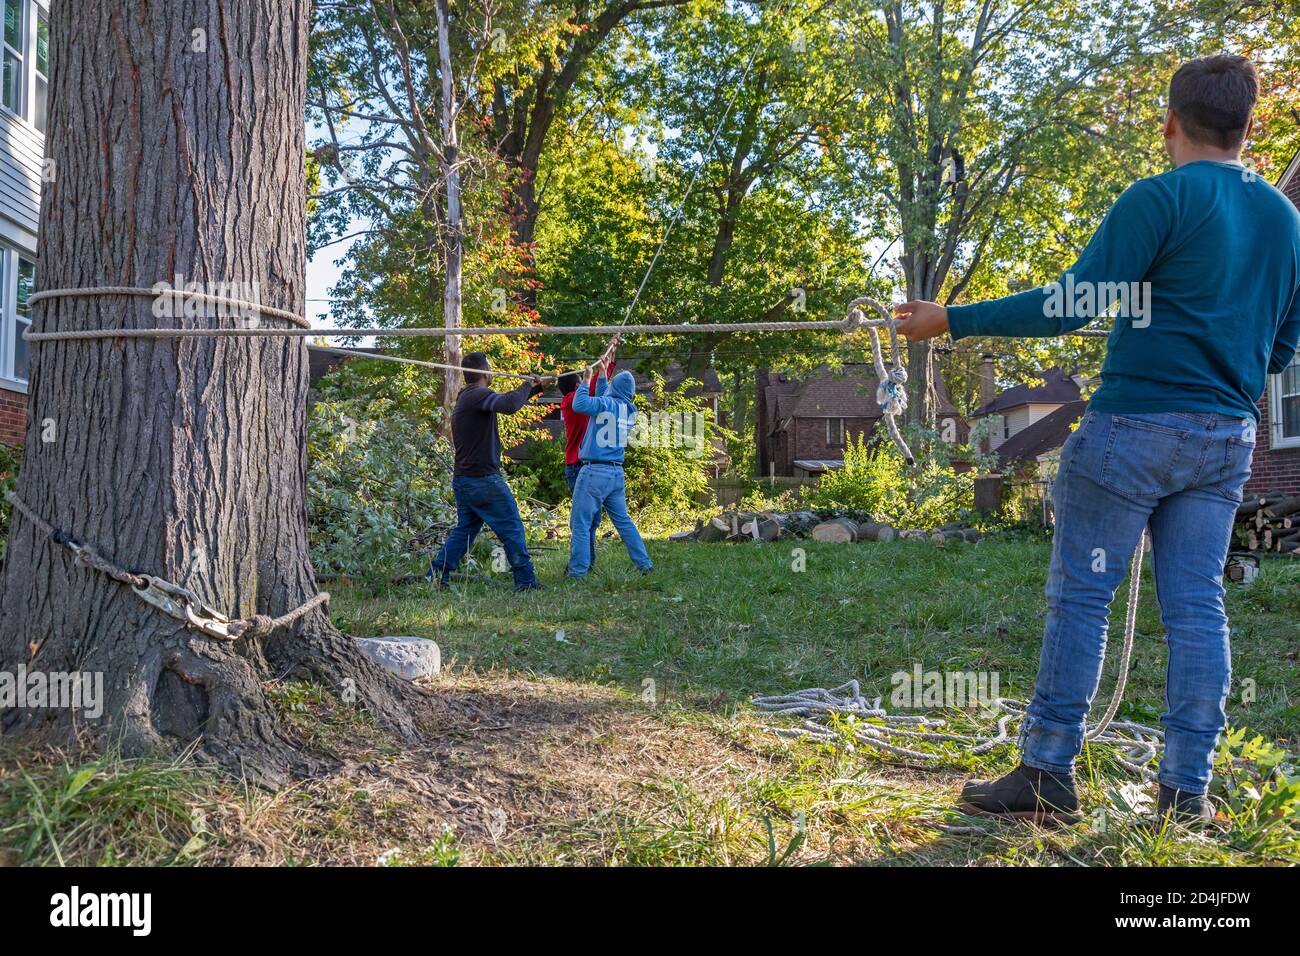 Detroit, Michigan - Tree removal in a residential neighborhood. The ground crew steers a falling branch into an open area. Stock Photo